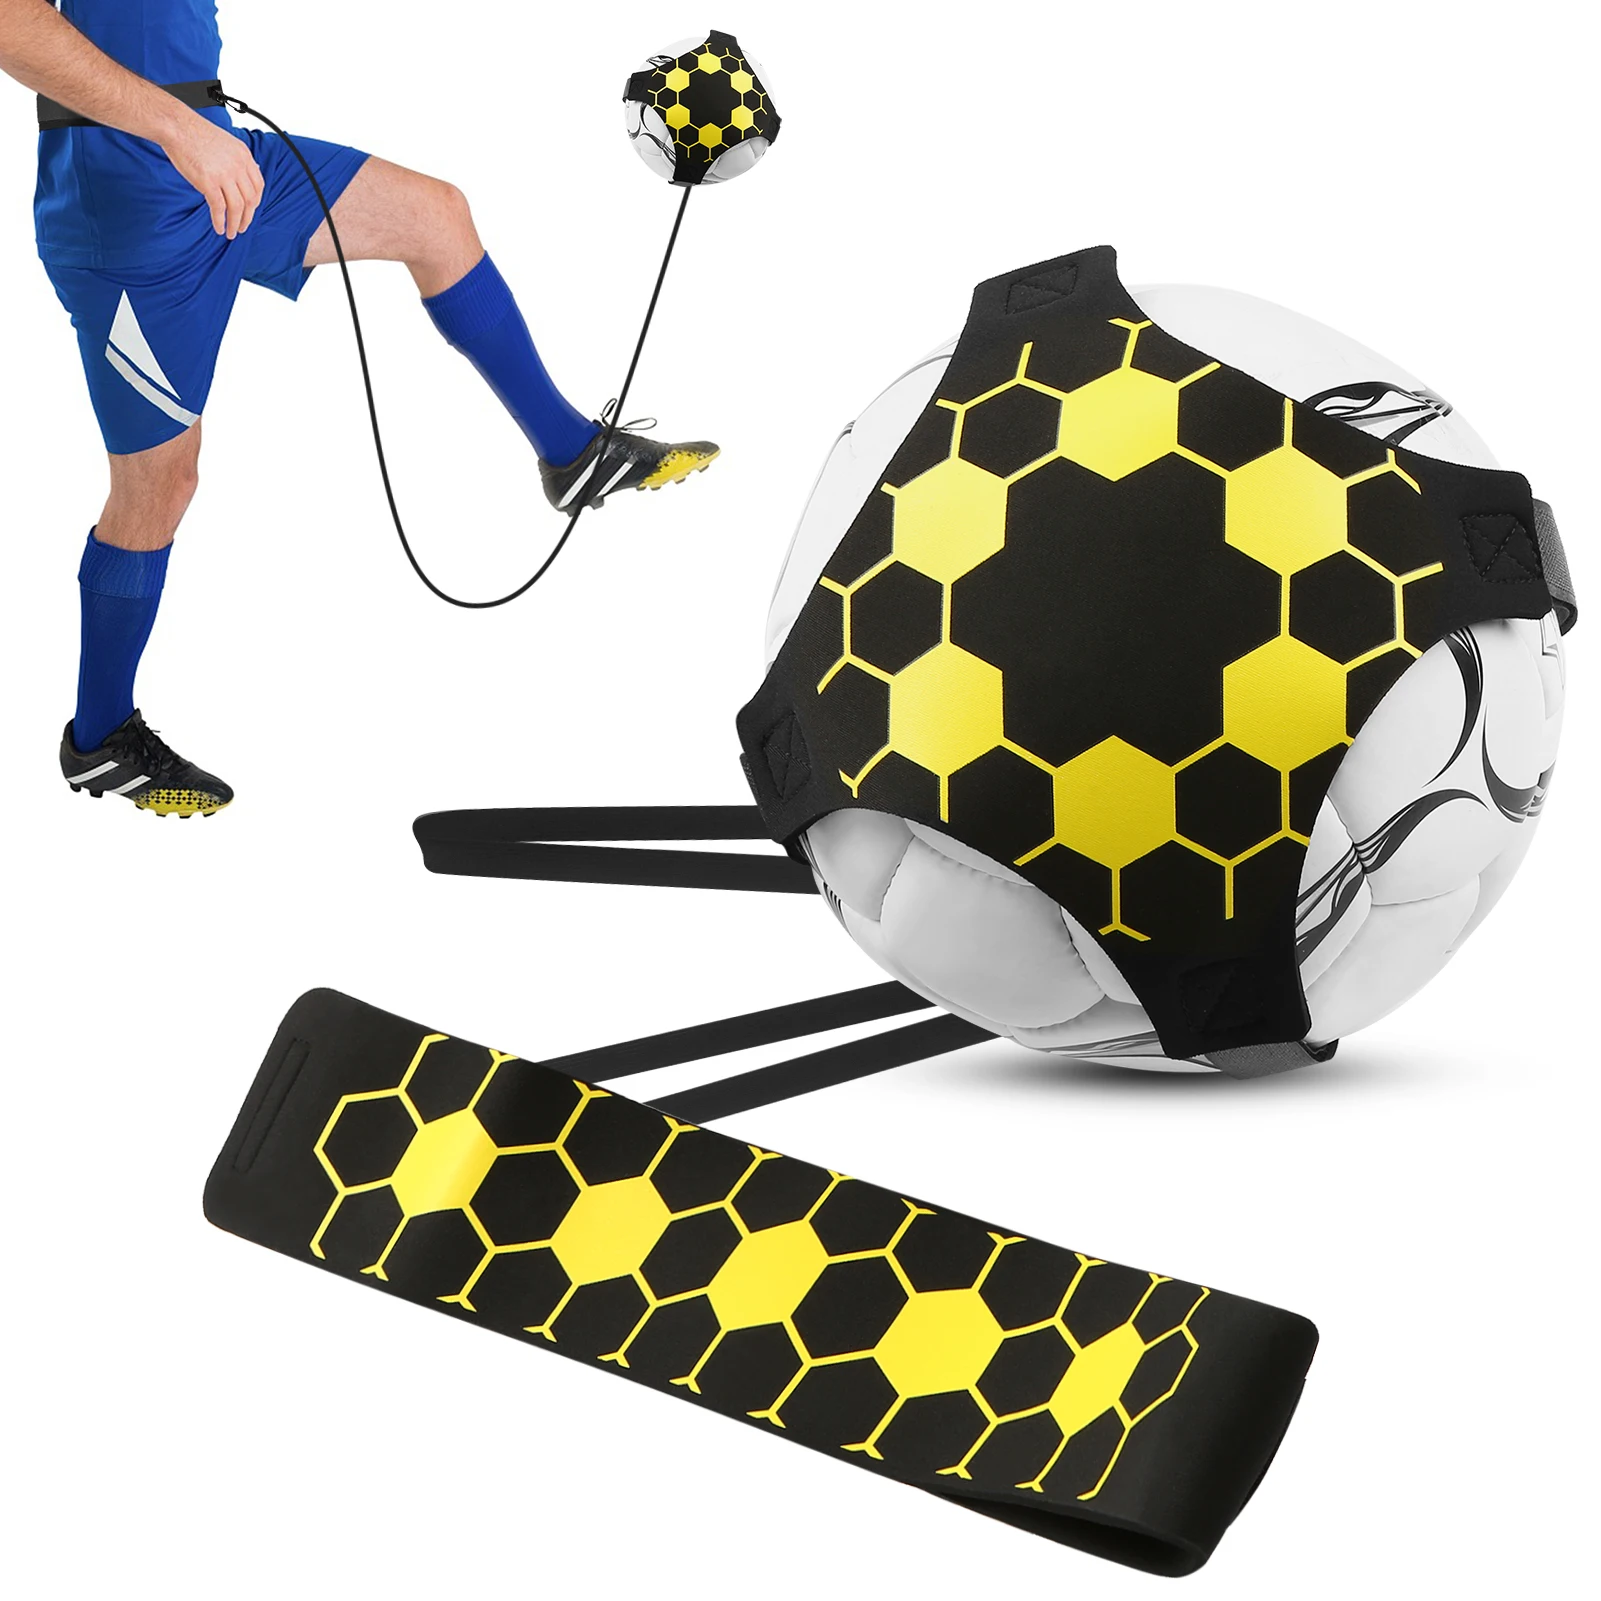 Kick Football Practice Train Aid Solo Soccer Trainer Return Accessories   HY 